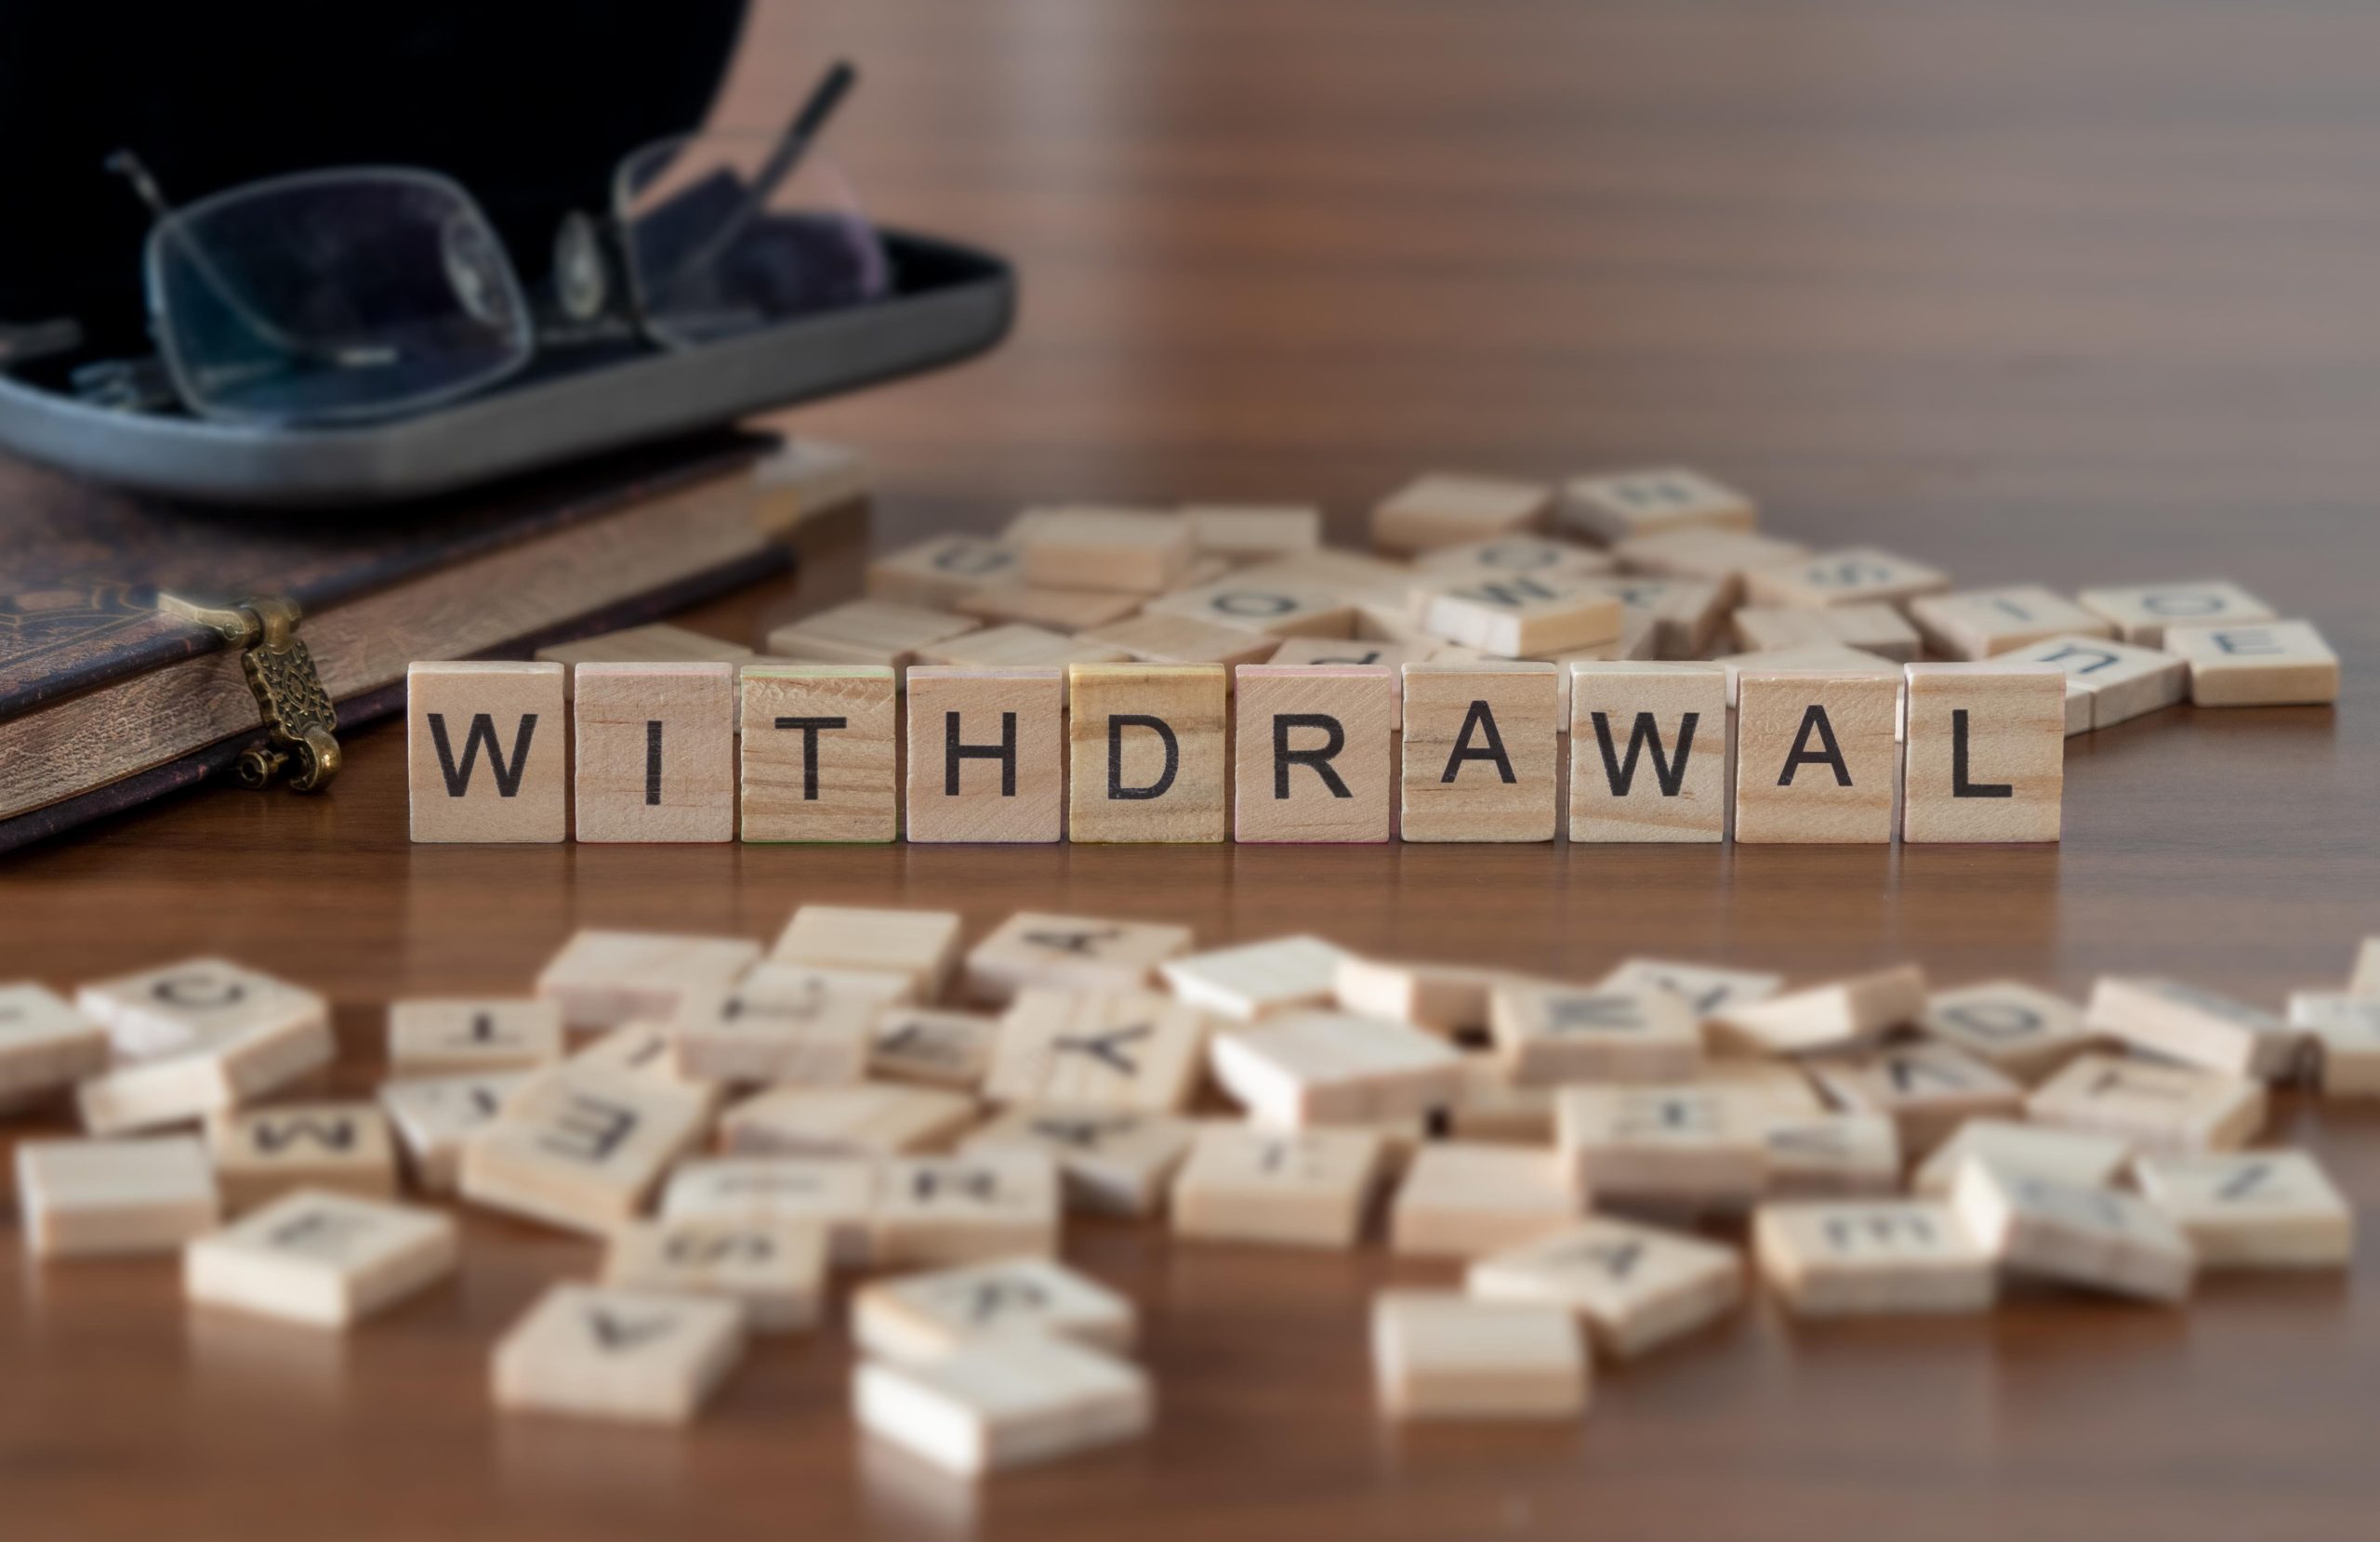 Withdrawal,Concept,Represented,By,Wooden,Letter,Tiles